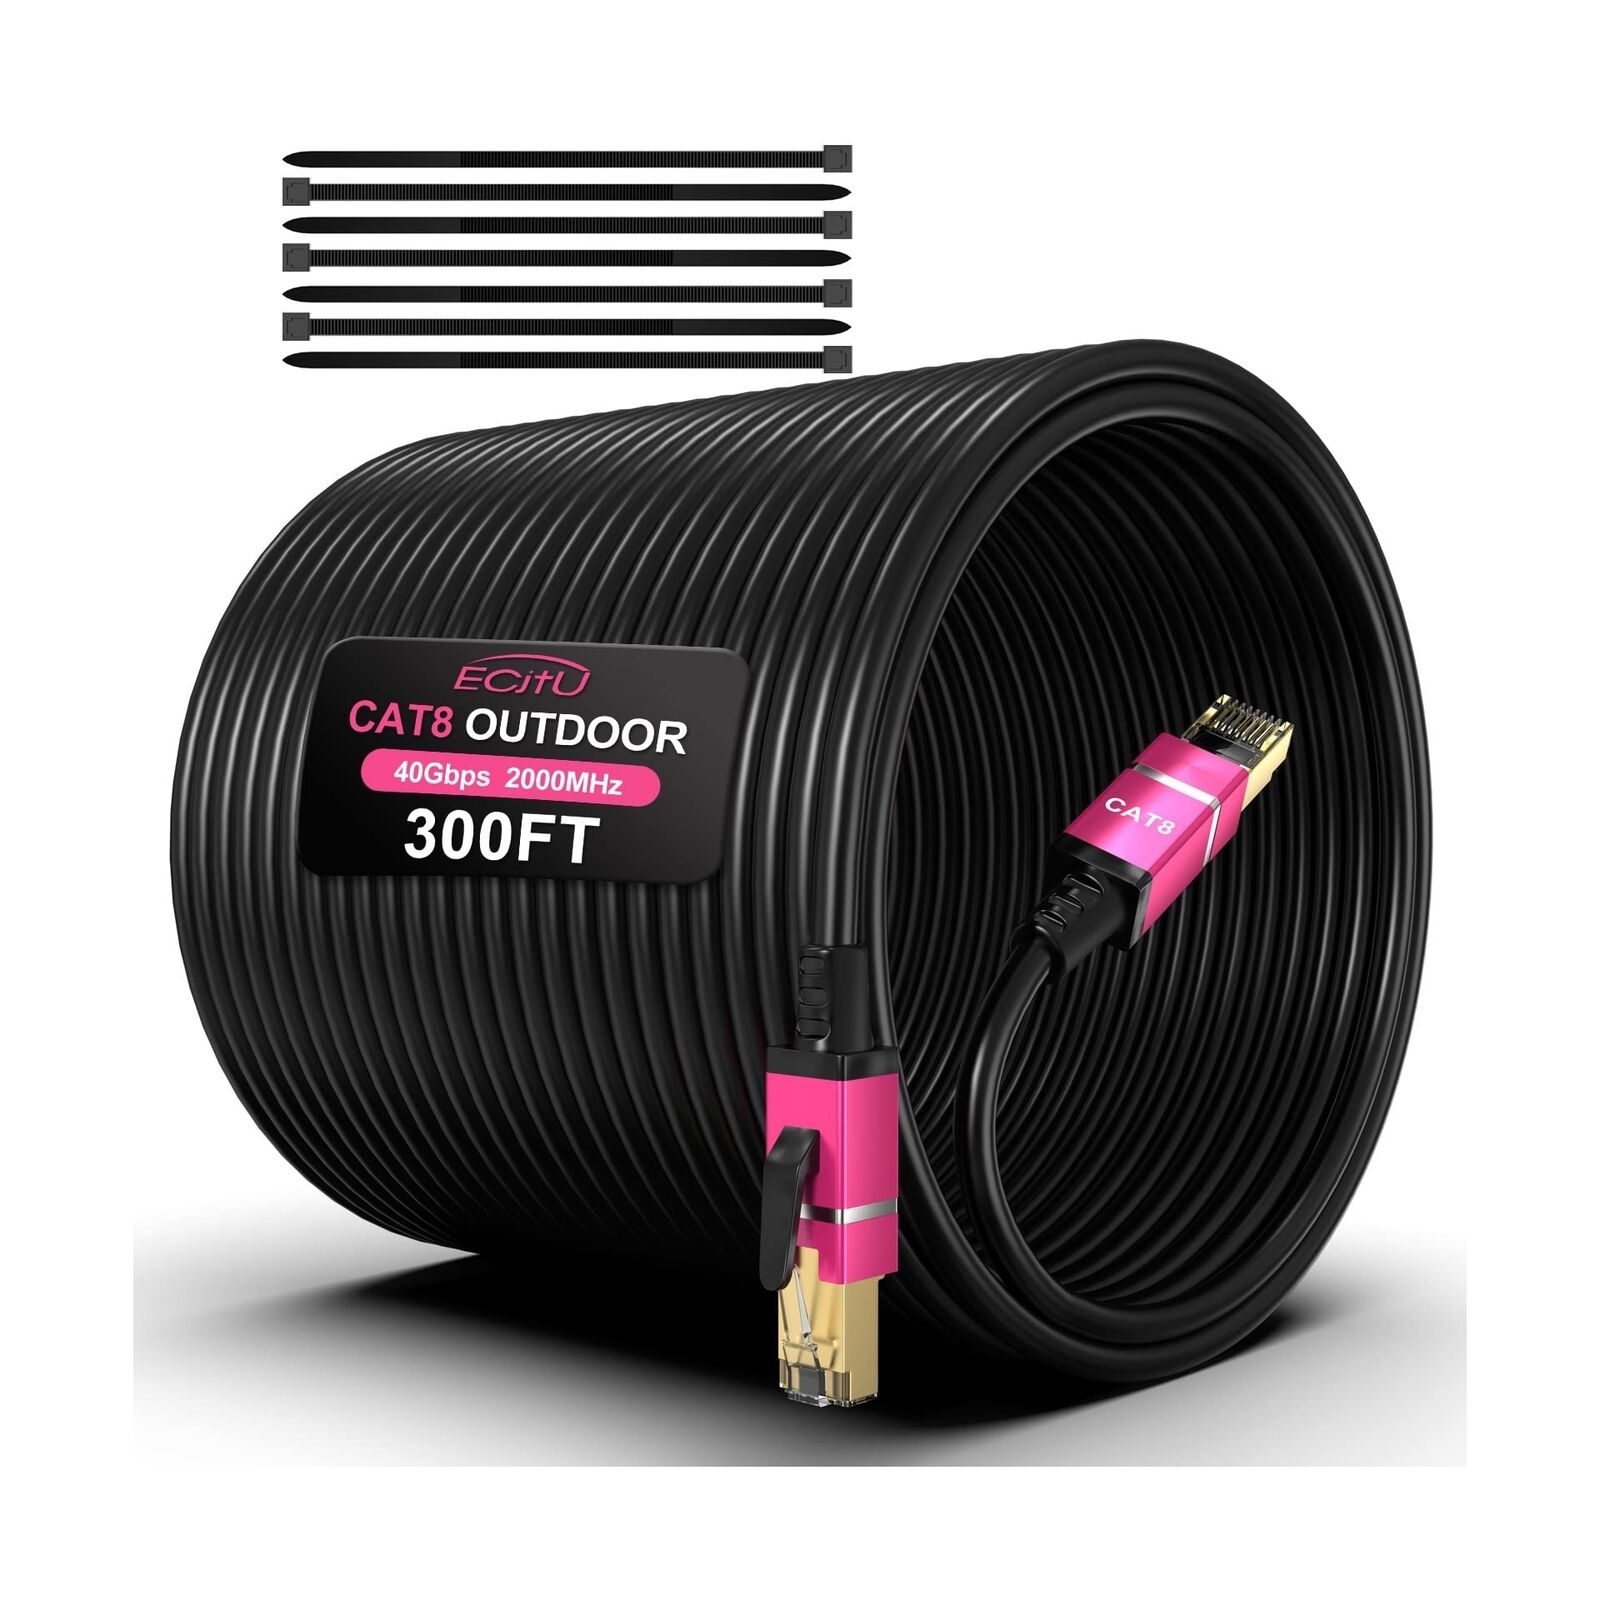 300FT Cat8 Outdoor Ethernet Cable, In-Ground, 26AWG Pure Copper Cat 8, Heavy ...